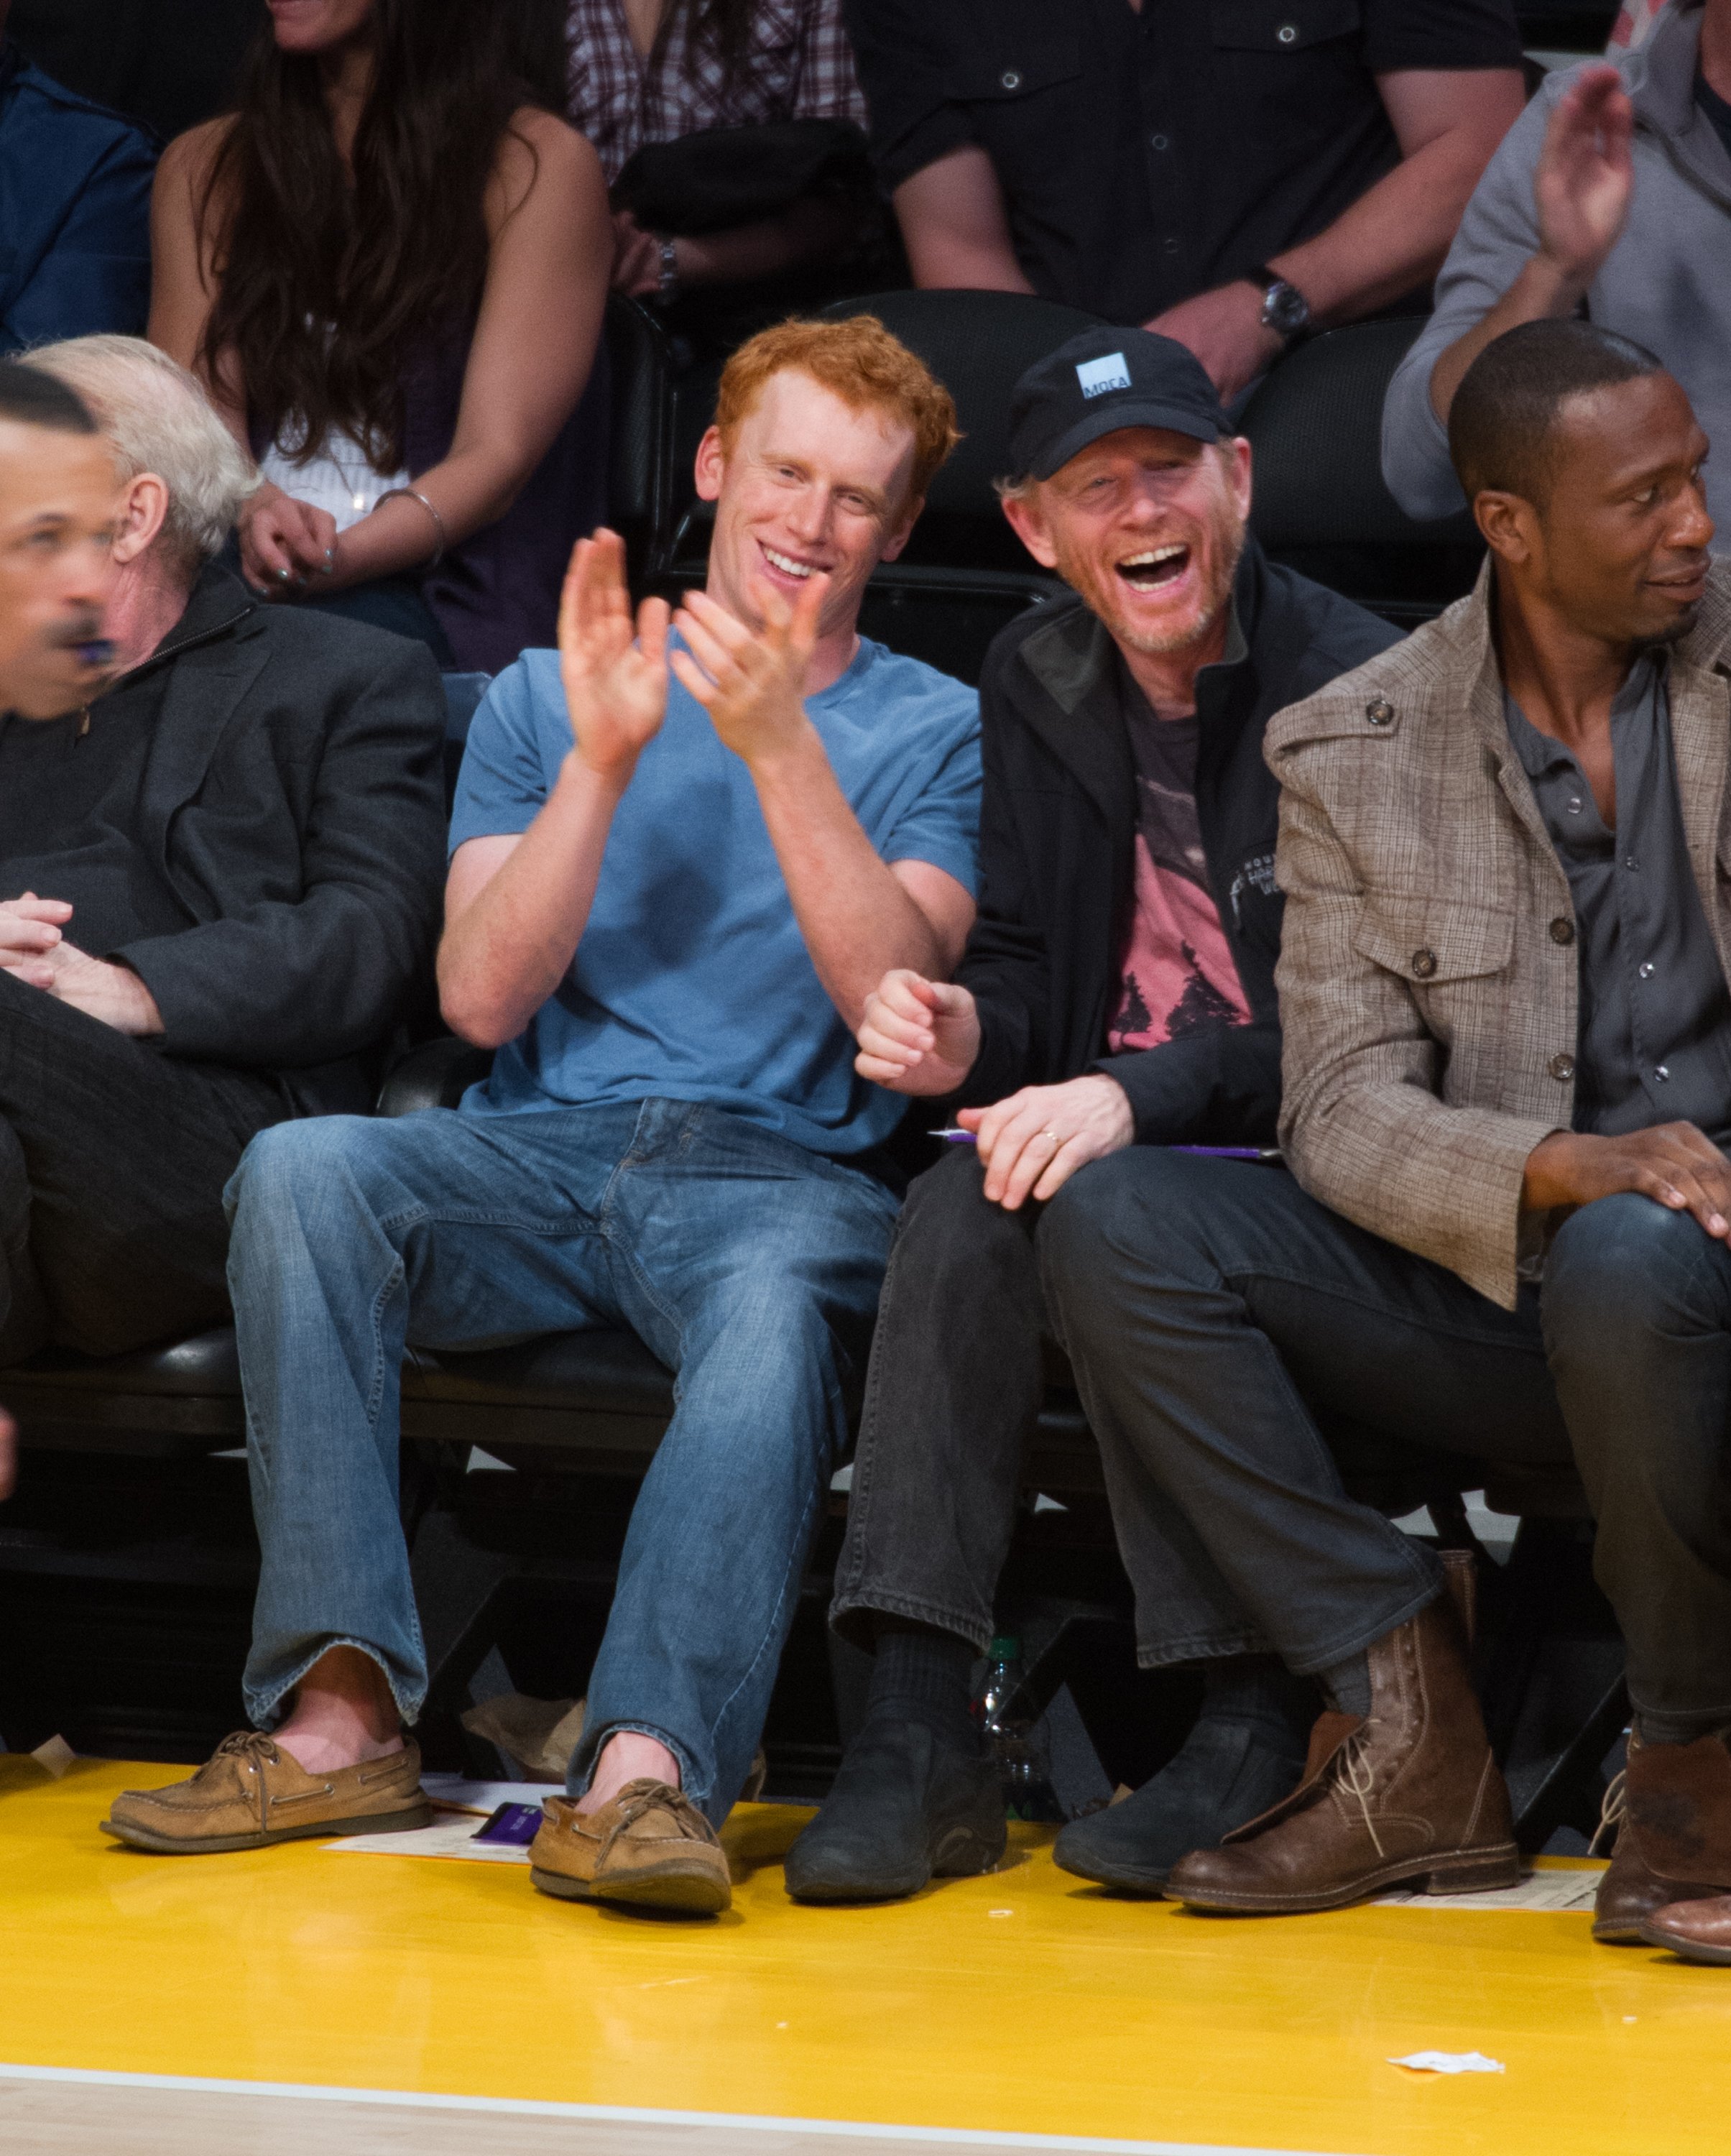 Reed Cross Howard and Ron Howard at the basketball game between the Atlanta Hawks and Los Angeles Lakers on March 3, 2013 | Source: Getty Images